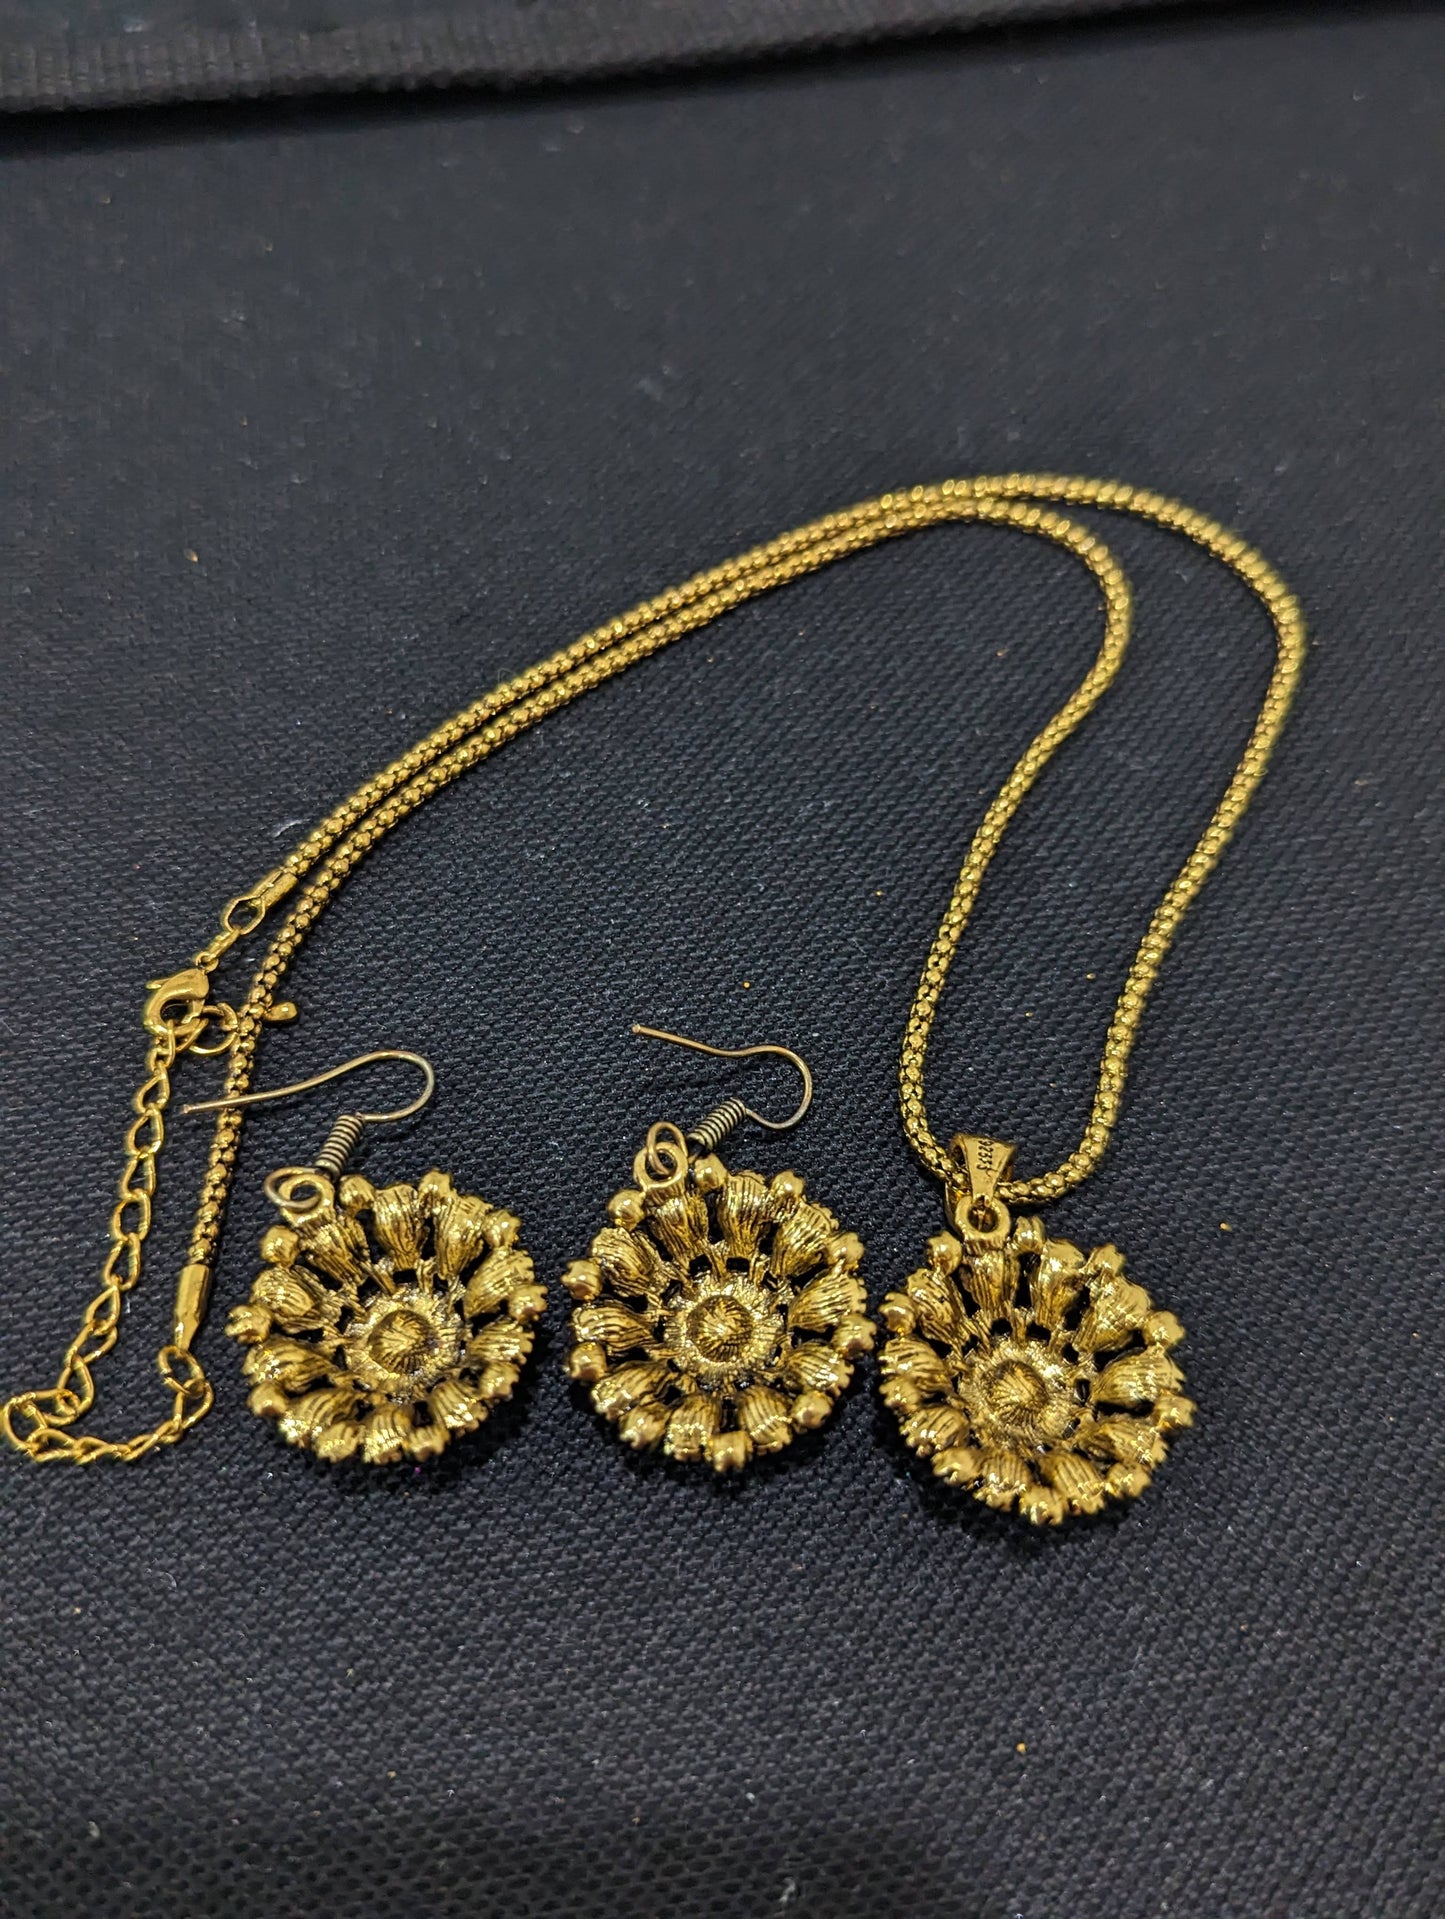 Antique gold plated pendant chain necklace and earring set